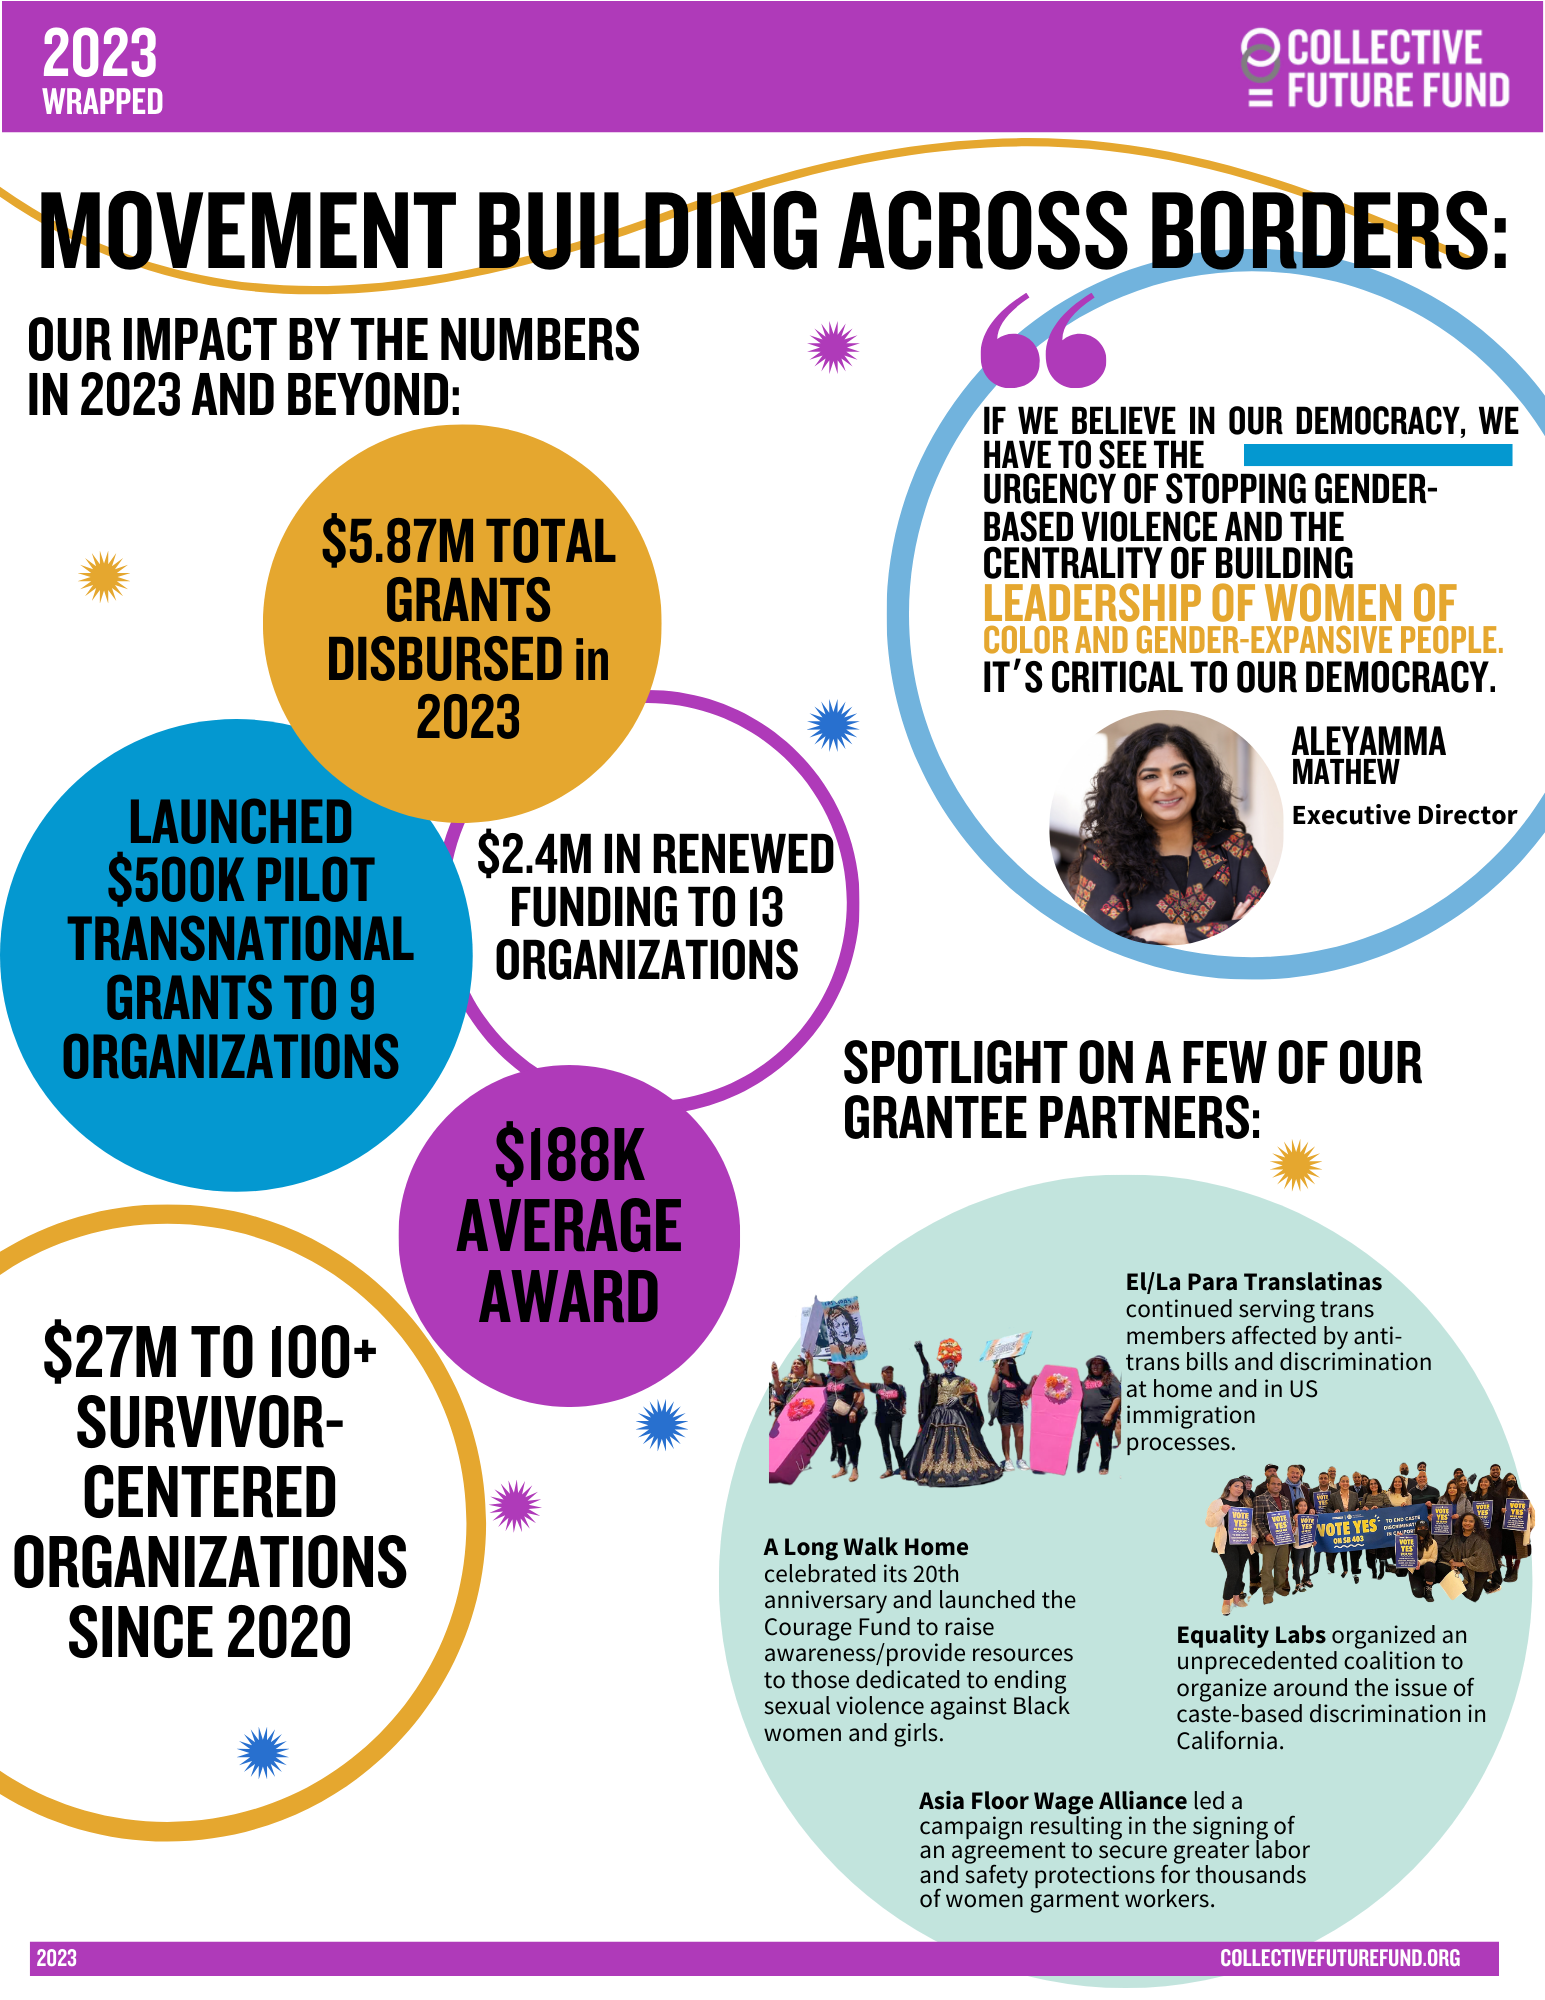 2023 Wrapped: Movement Building Across Borders